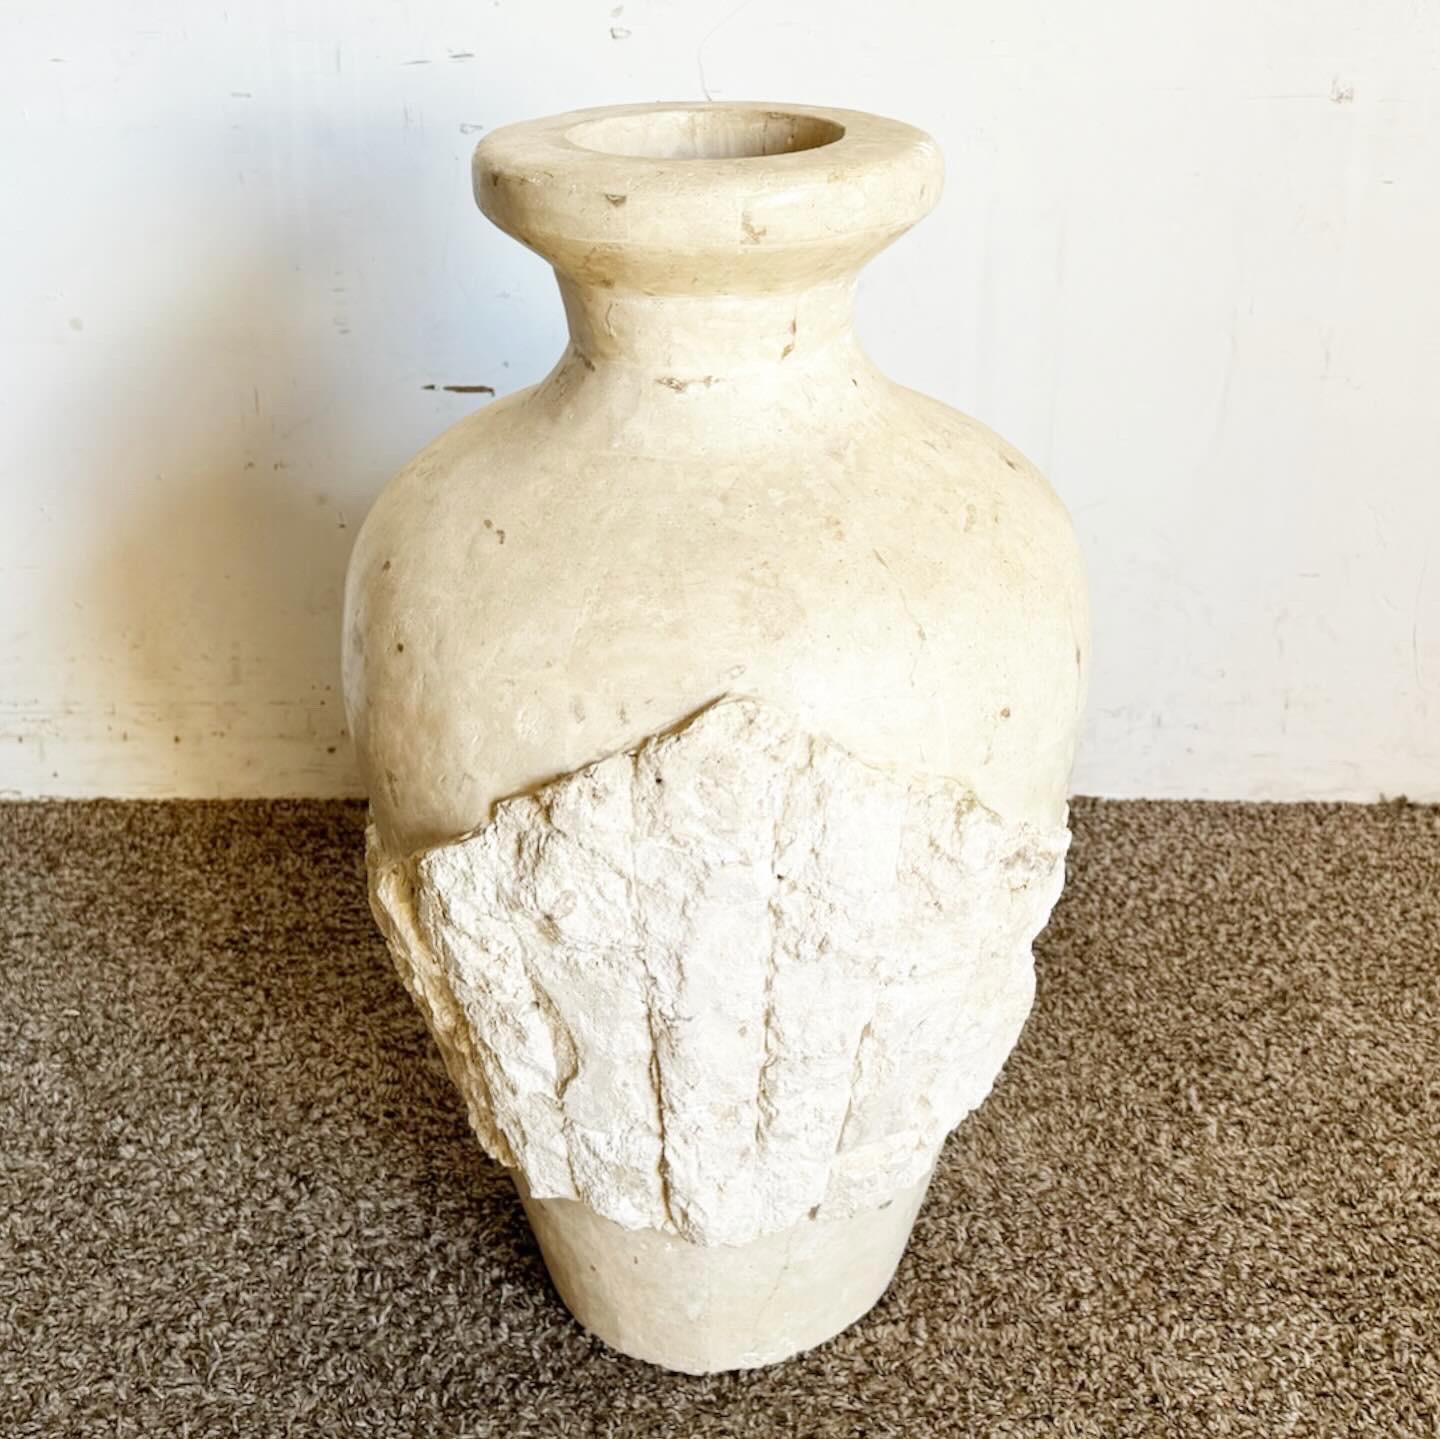 Transform your space with the Postmodern Tessellated Raw and Polished Stone Floor Vase. This unique vase showcases a blend of raw and polished stone, creating a stunning visual contrast. Perfect for contemporary decor, it serves as a bold statement